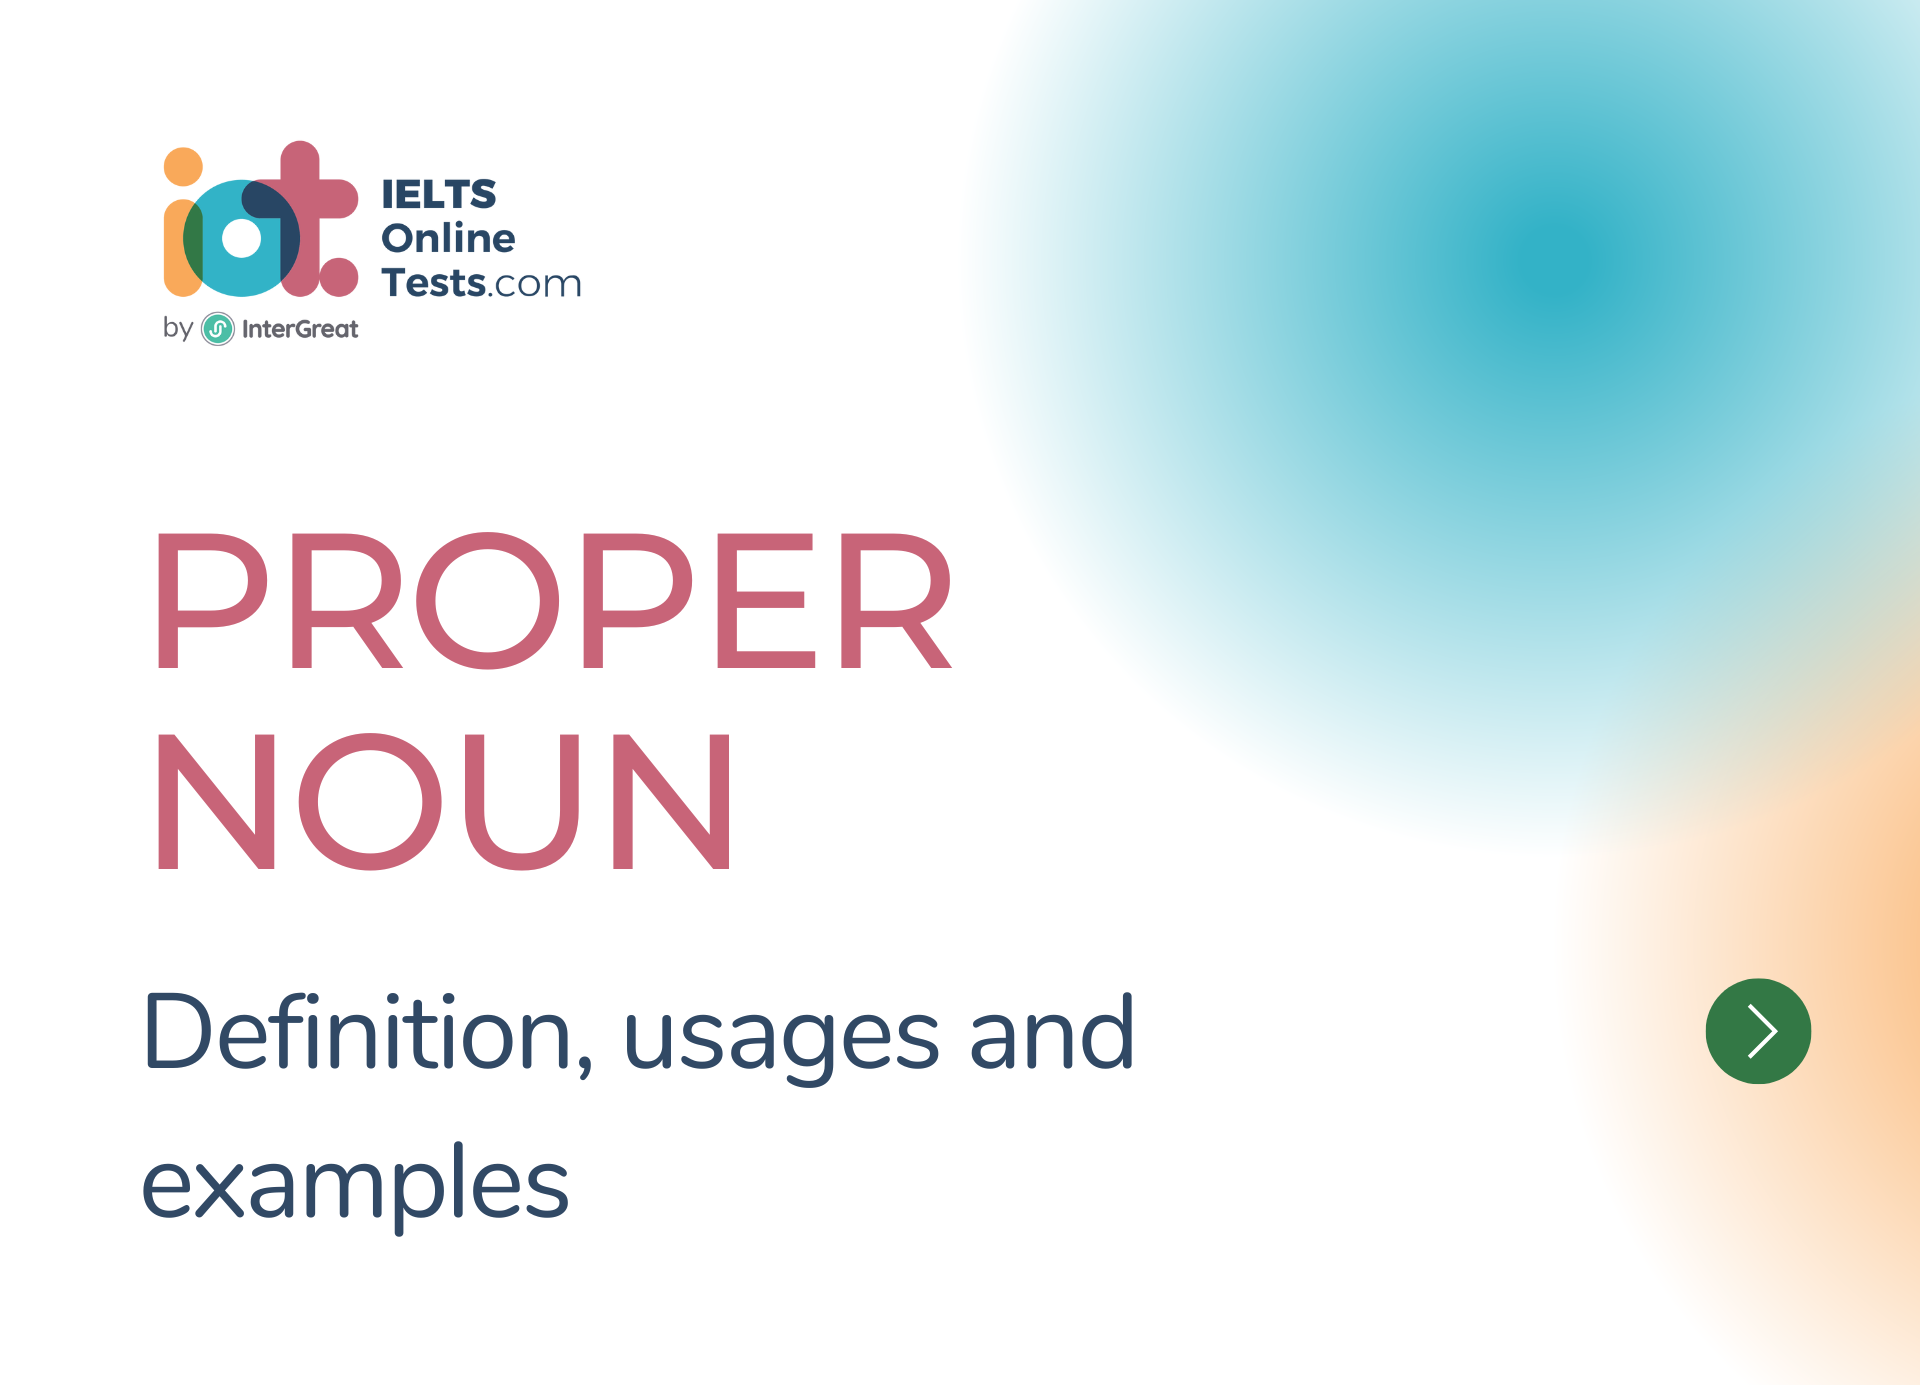 Proper Noun definition, usages and examples